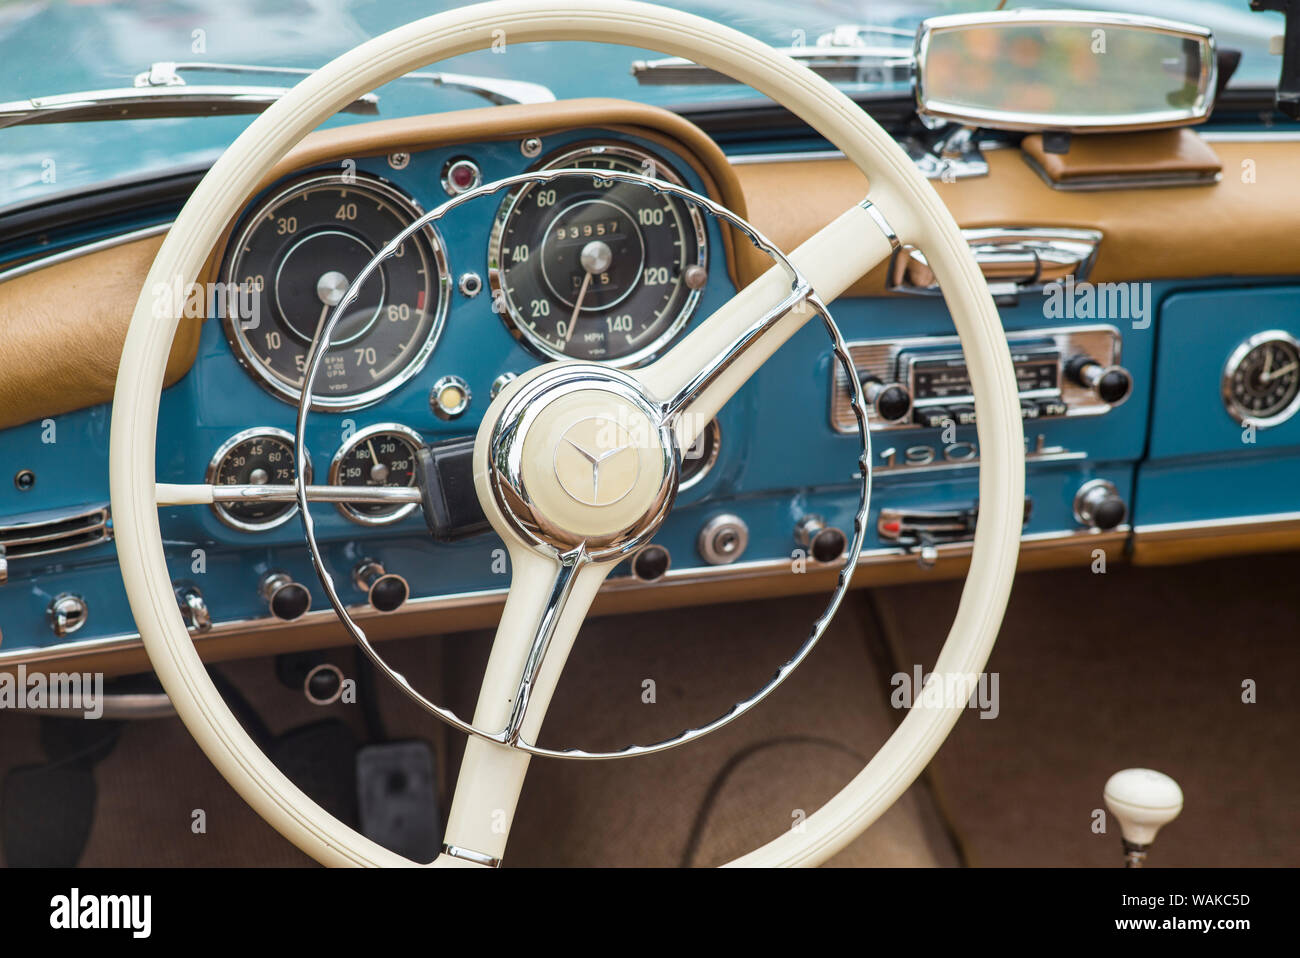 190sl High Resolution Stock Photography And Images Alamy